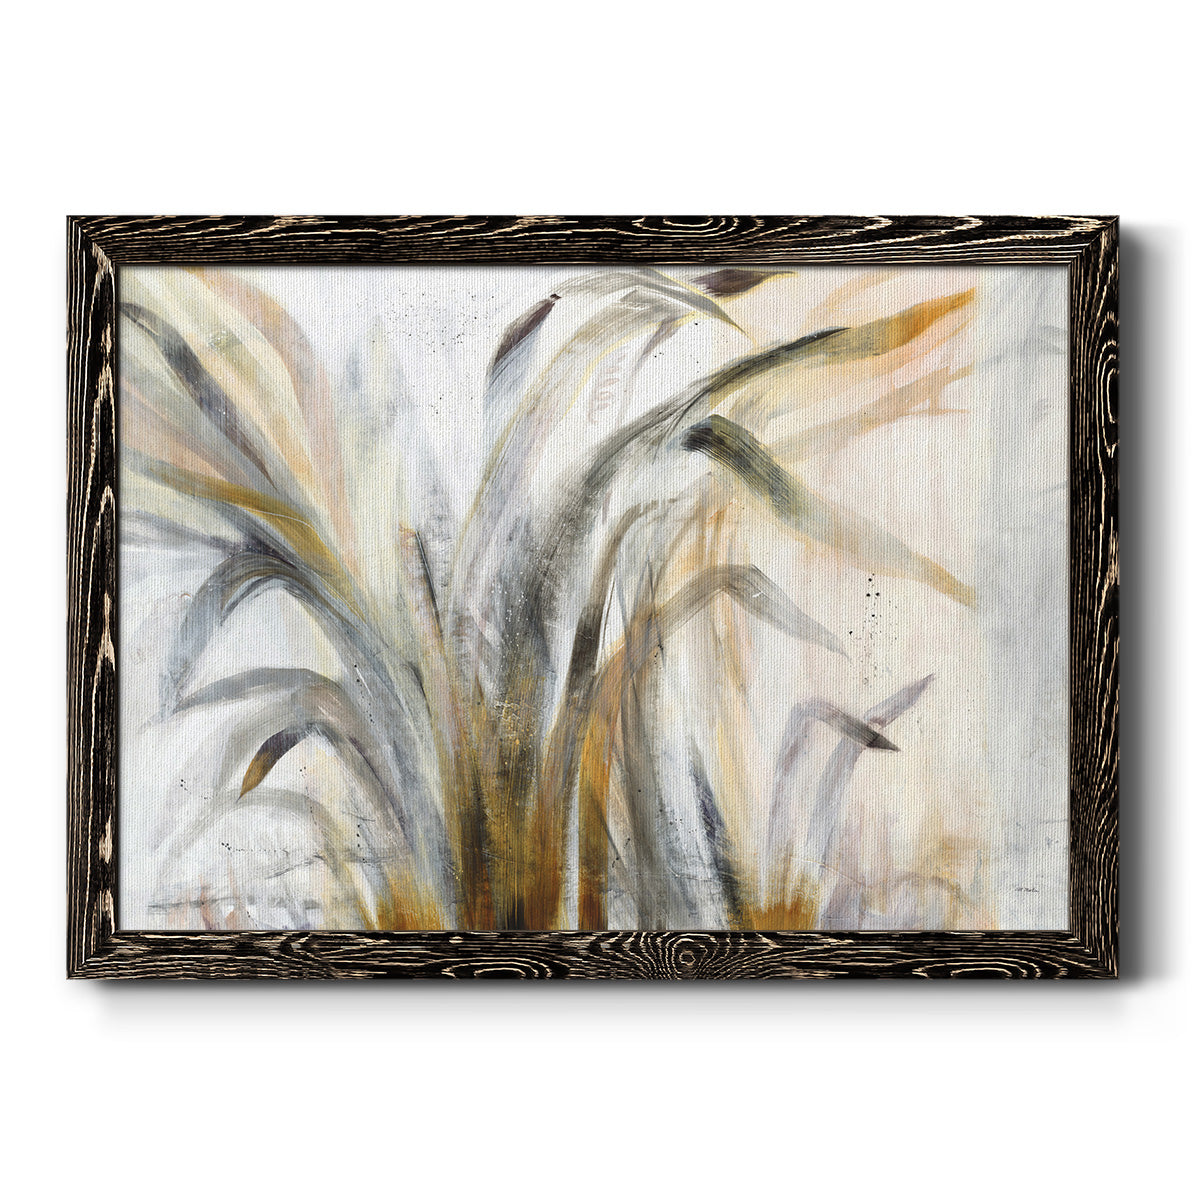 Deluge-Premium Framed Canvas - Ready to Hang